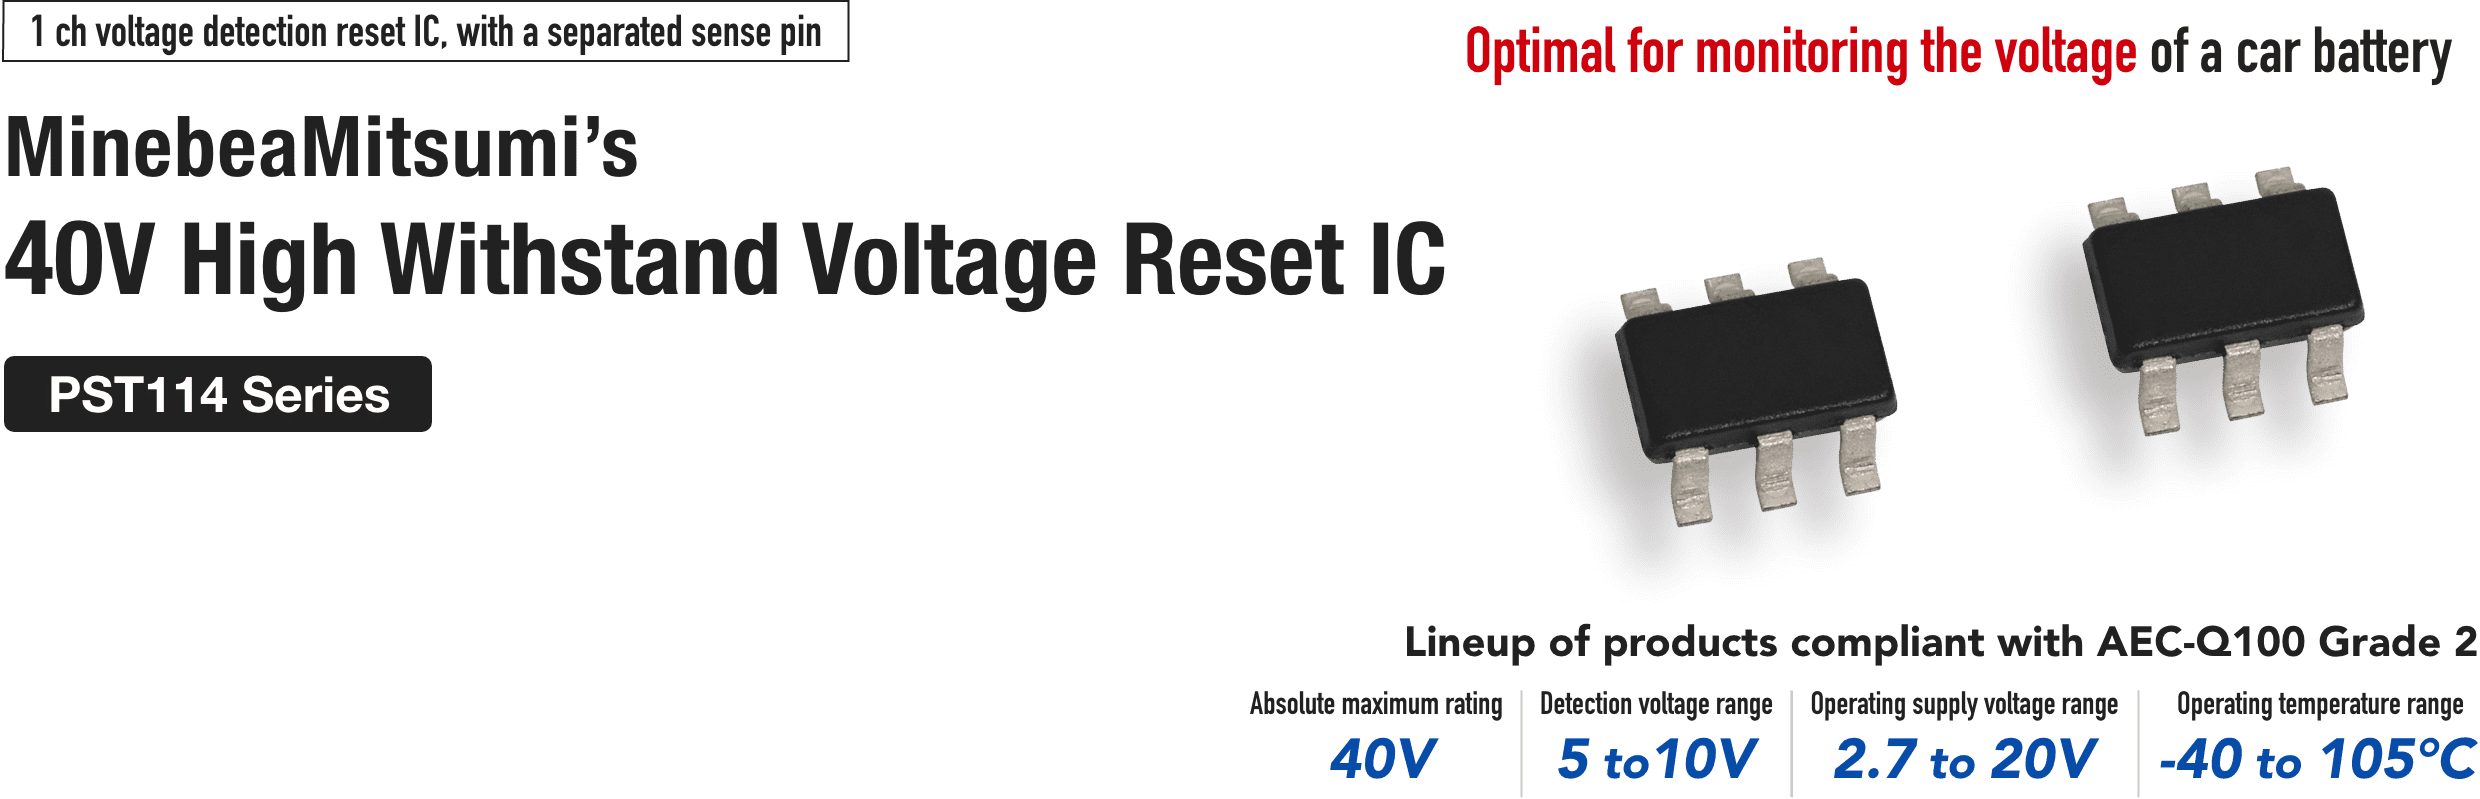 1ch voltage detection reset IC, with a separated sense pin MinebeaMitsumi's
                     40 V High Withstand Voltage Reset IC
                     PST114 Series
                     Optimal for monitoring the voltage of a car battery
                     Lineup of products compliant with AEC-Q100 Grade 2
                     Absolute maximum rating 40V
Detection voltage range 5 to 10 V
Operating supply voltage range 2.7 to 20 V
Operating temperature range -40°C to -105°C